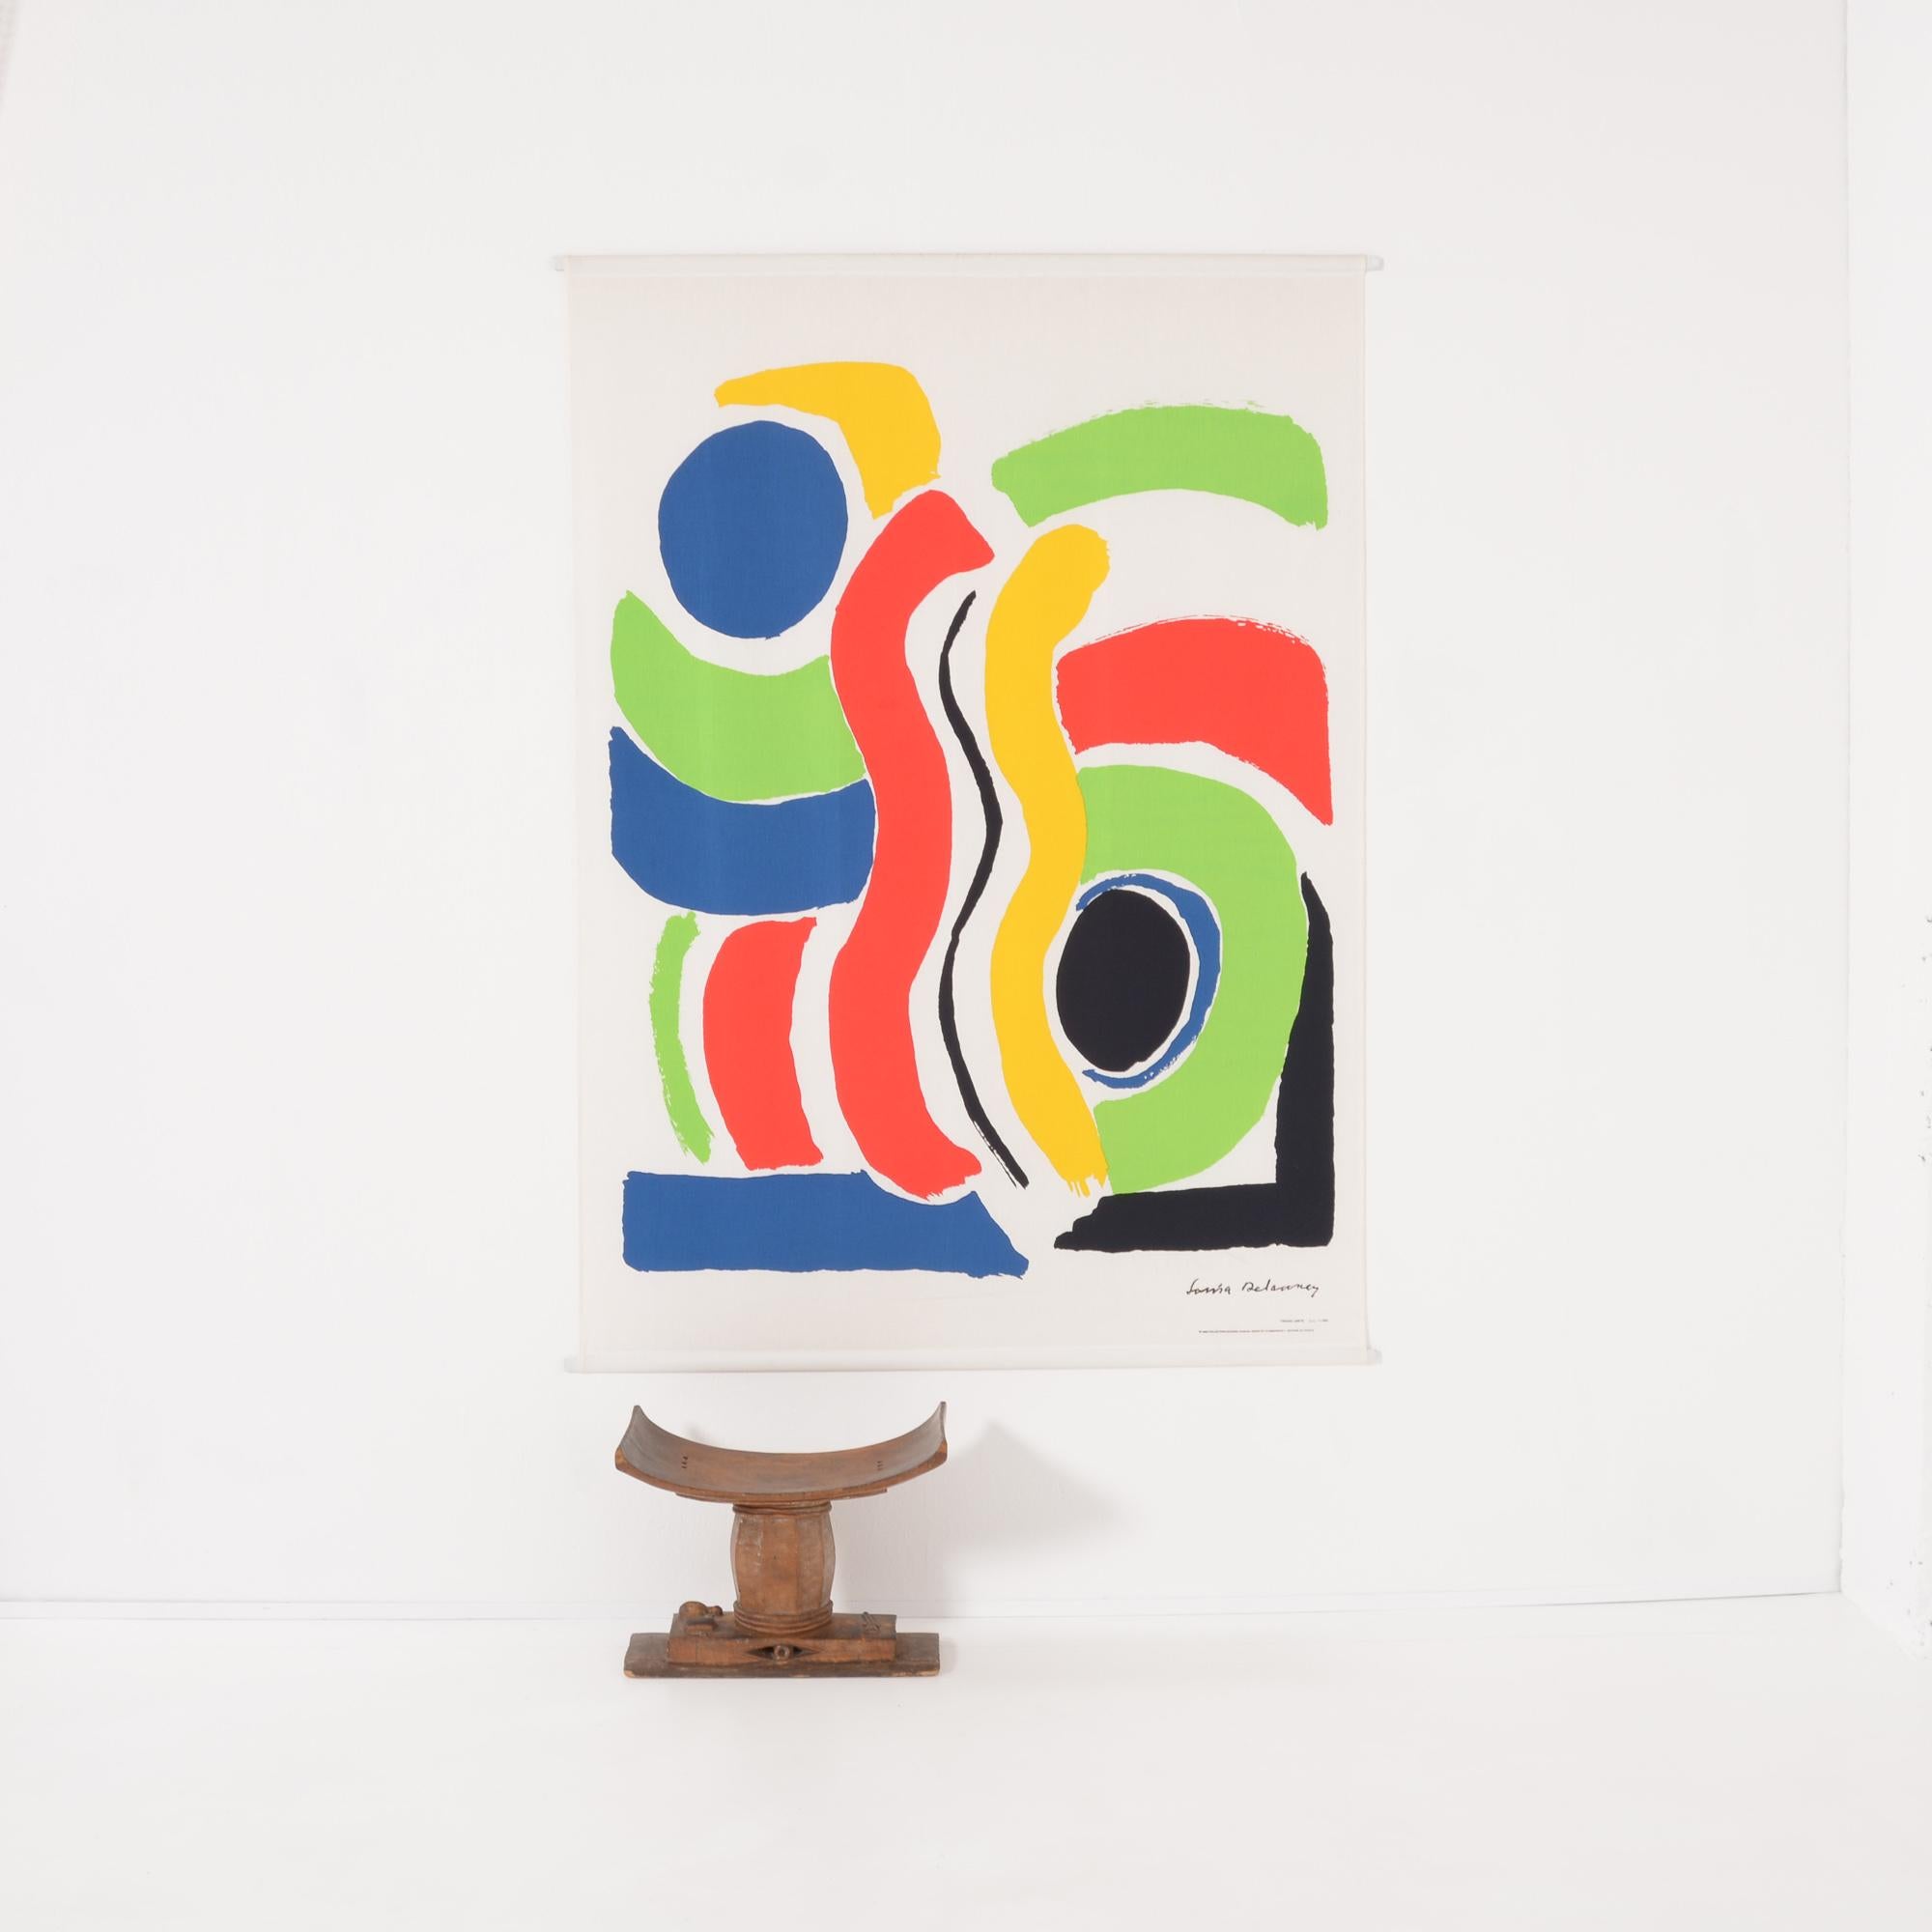 Extra Large Print on Canvas of Sonia Delaunay by Jacques Damase, 1992 For Sale 3